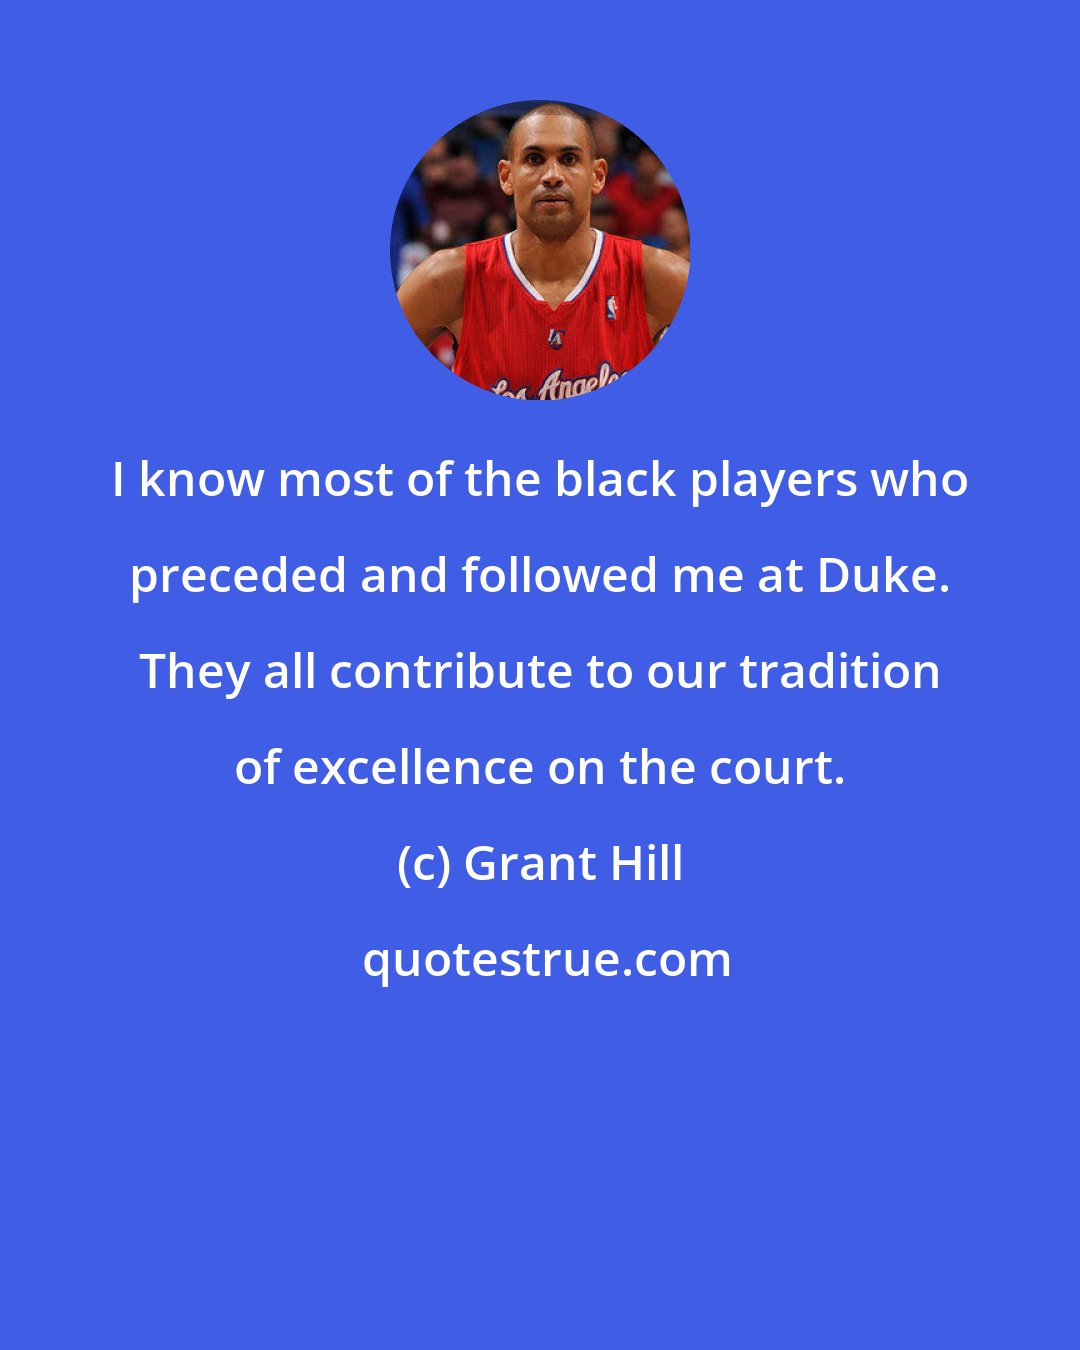 Grant Hill: I know most of the black players who preceded and followed me at Duke. They all contribute to our tradition of excellence on the court.